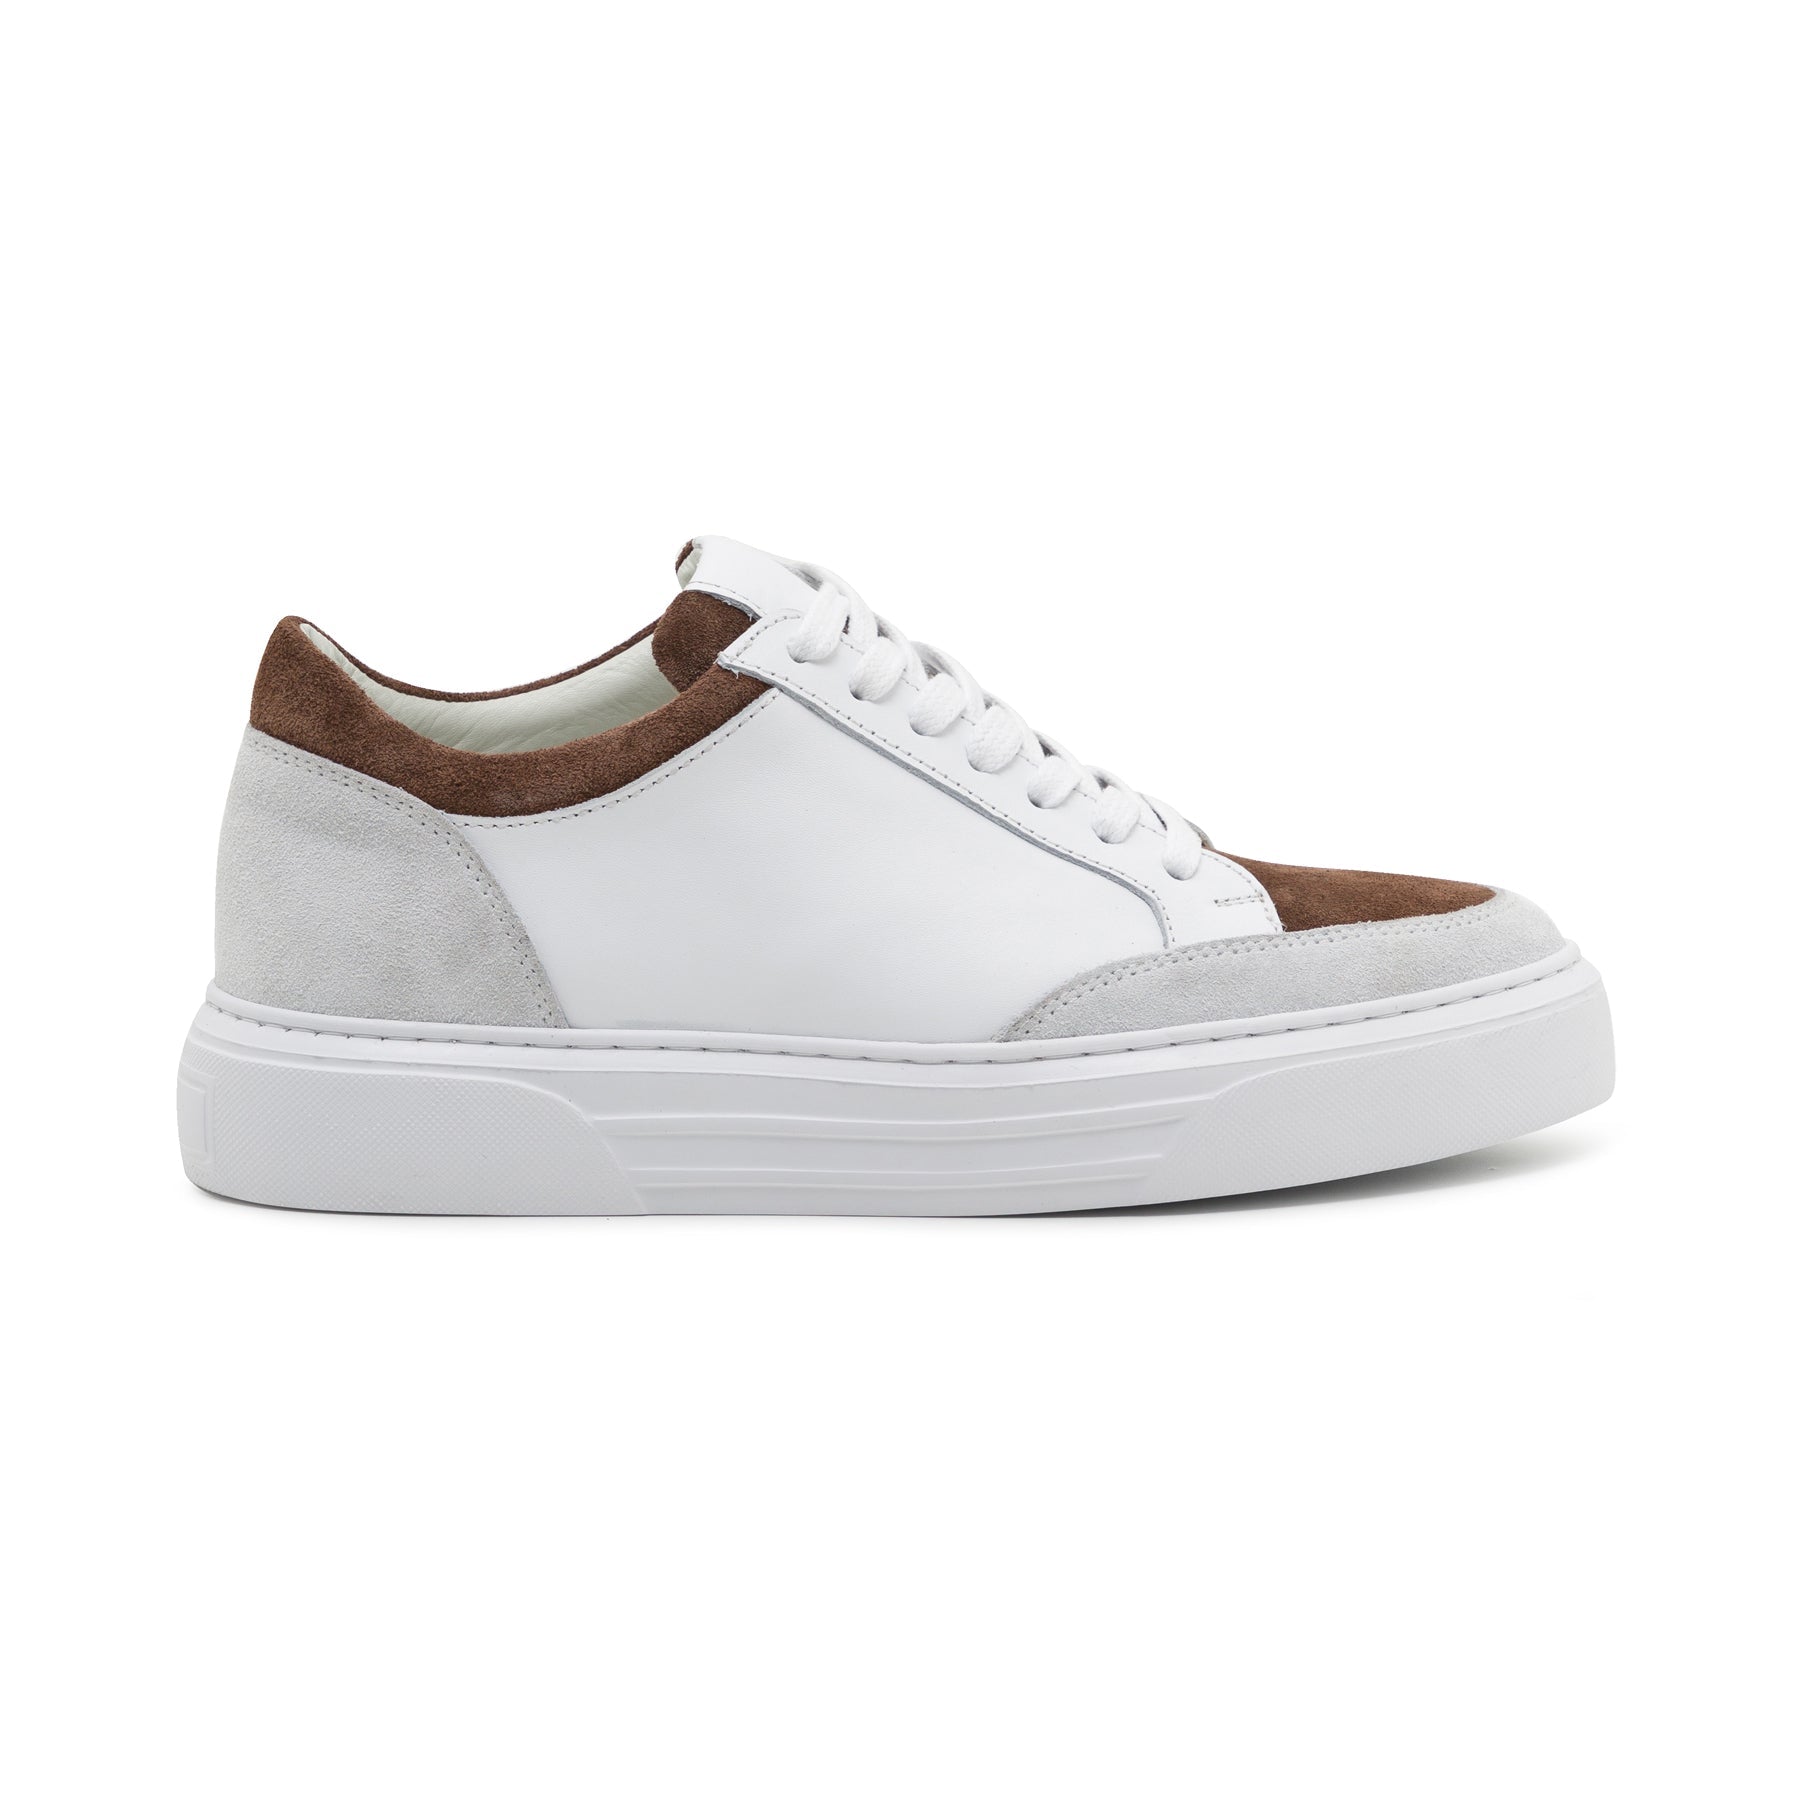 Morty White Suede Sneaker